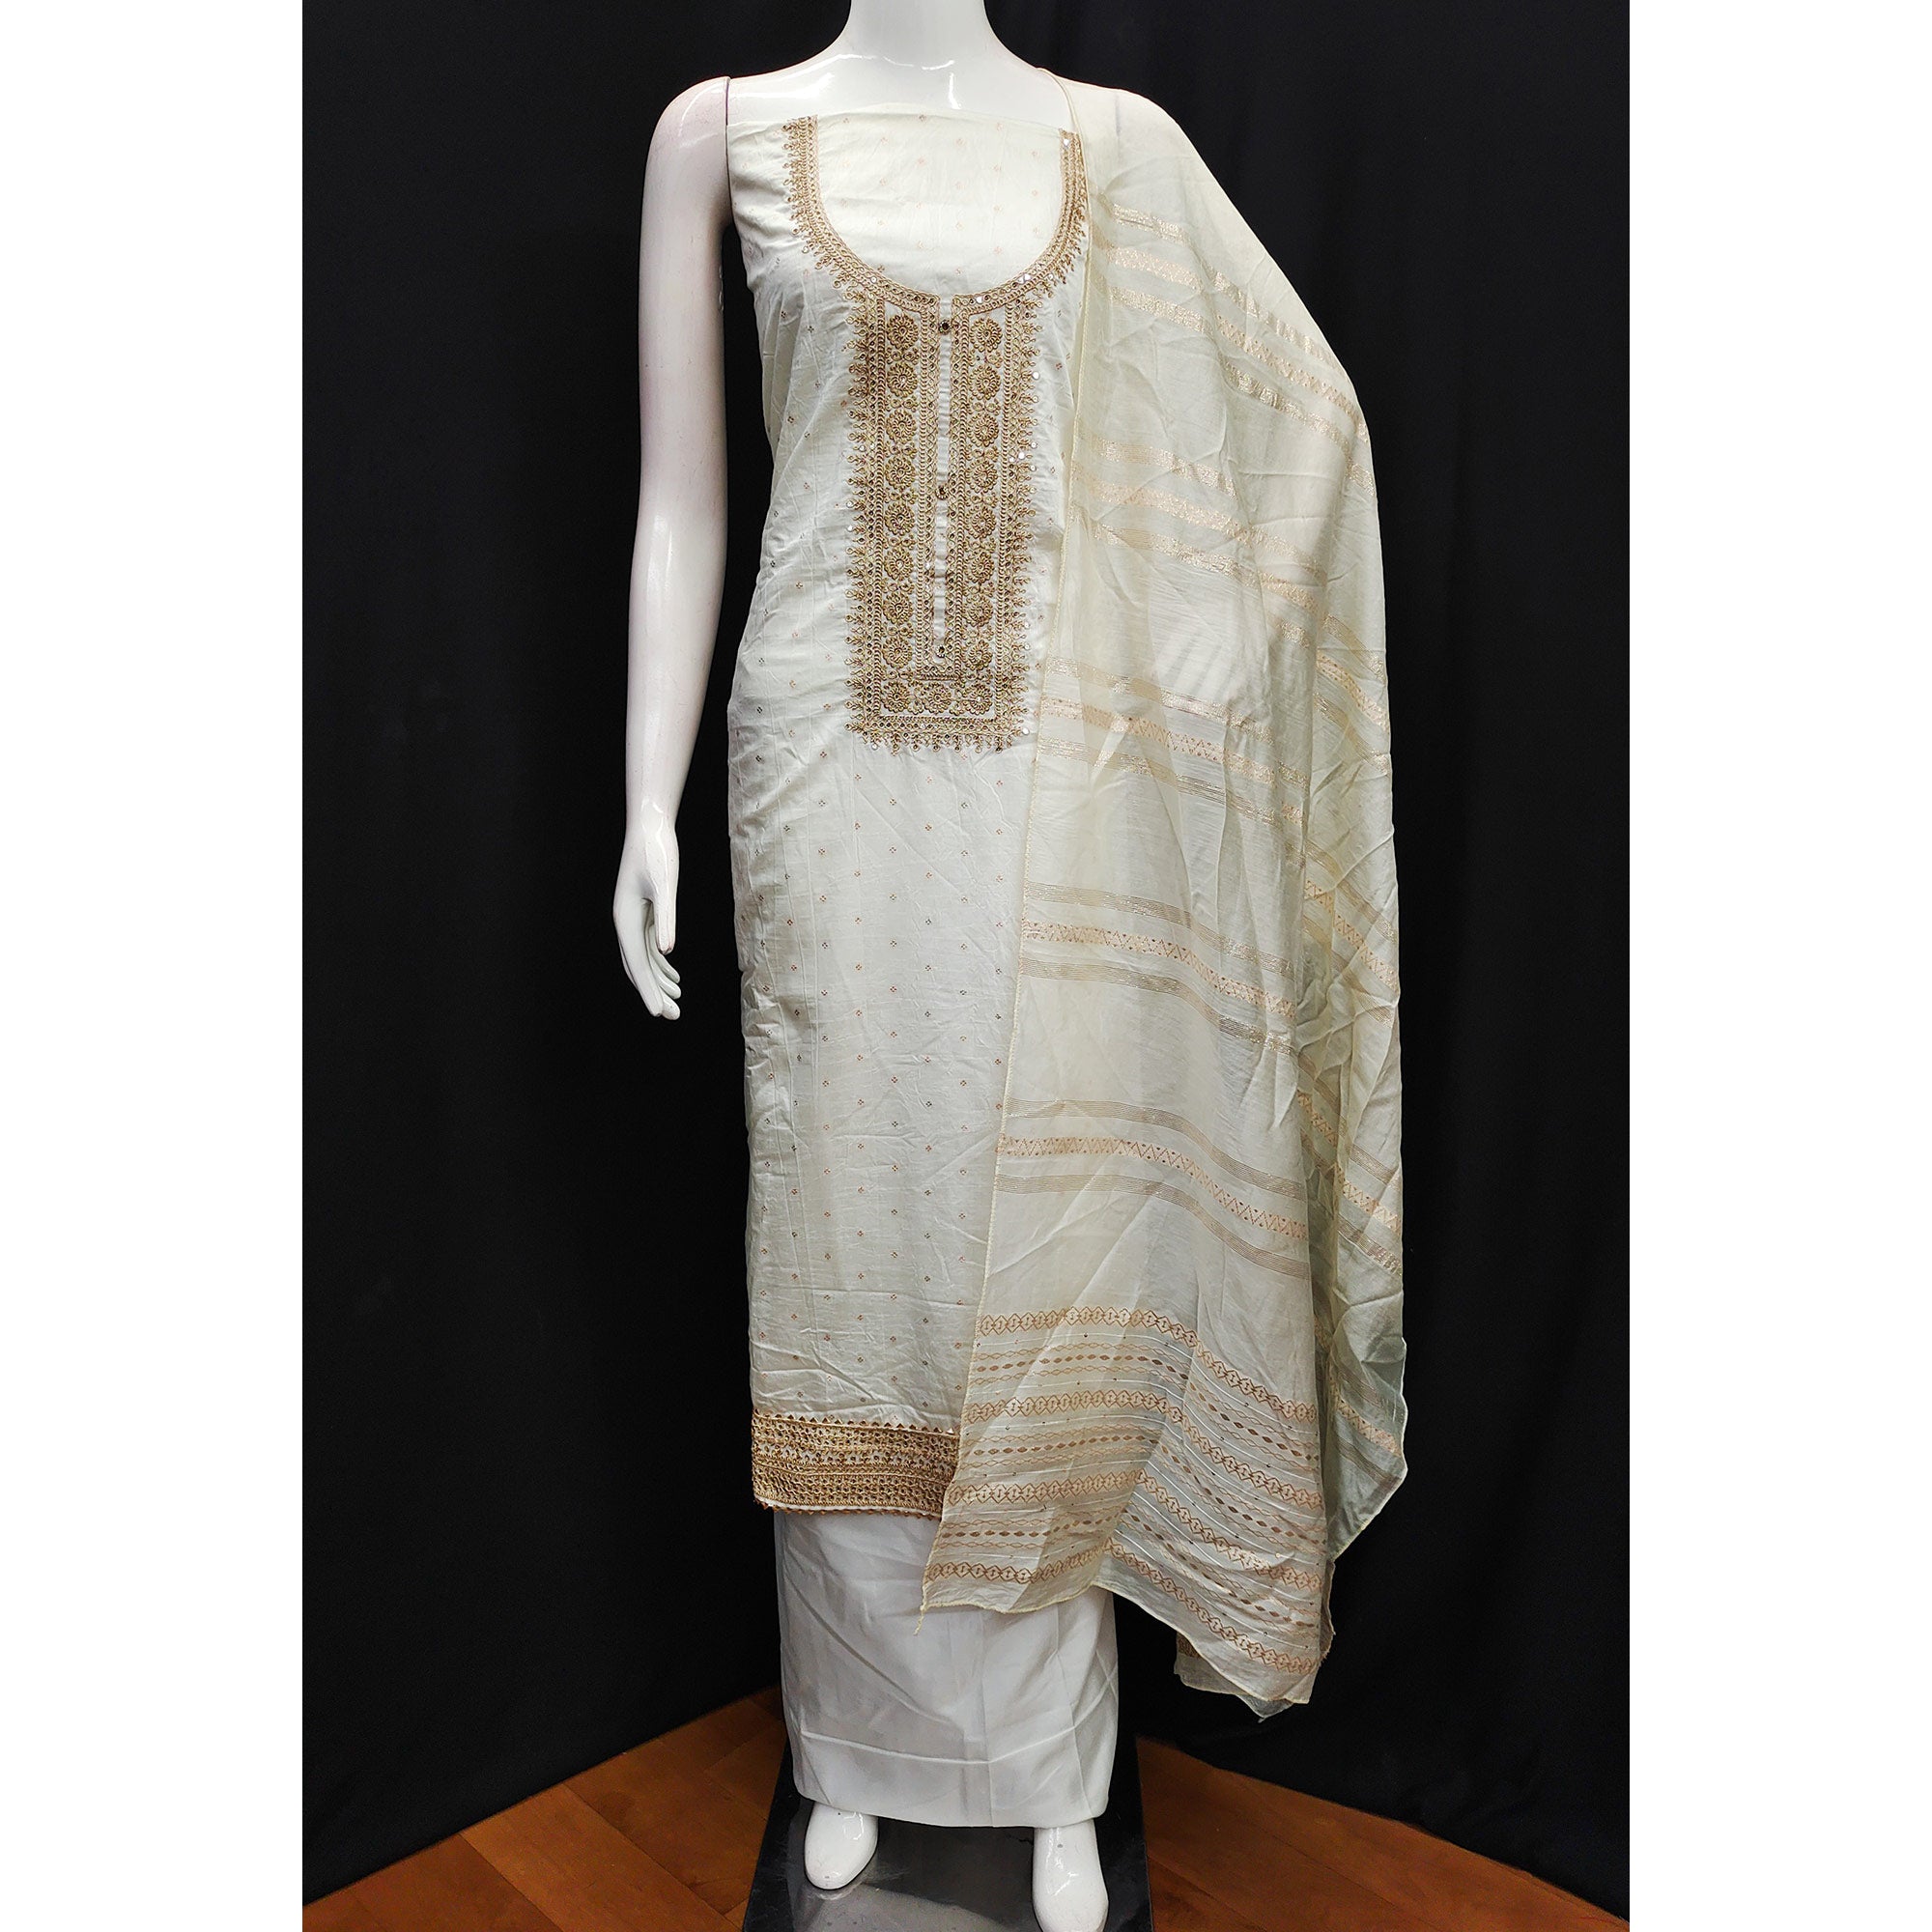 Off White Butti With Embroidered Chanderi Silk Dress Material